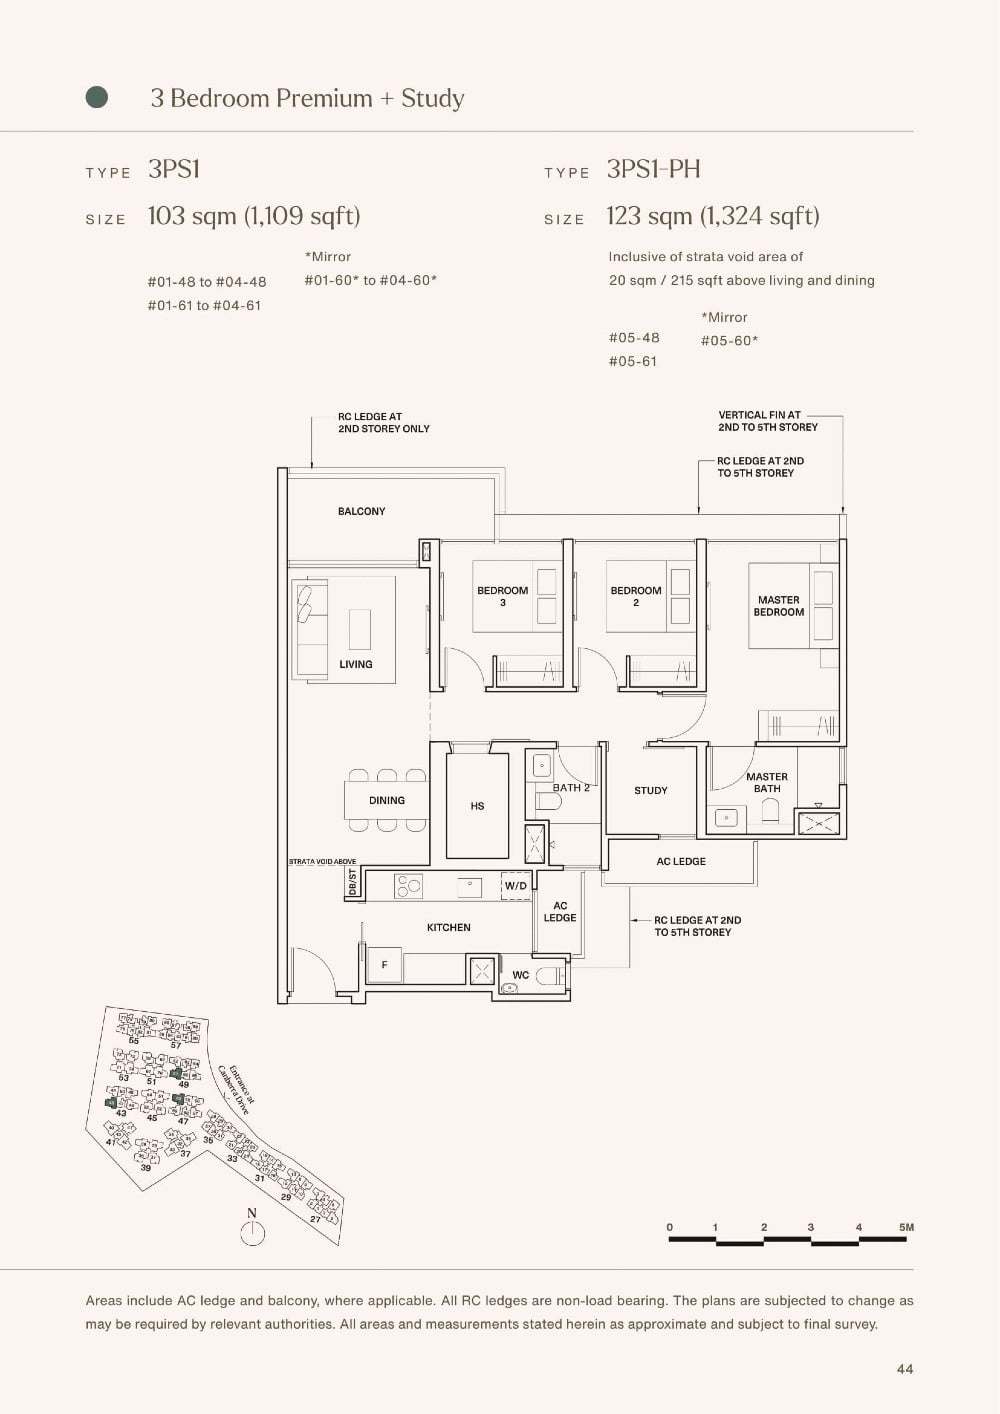 fp-the-watergardens-at-canberra-3ps1-floor-plan.jpg